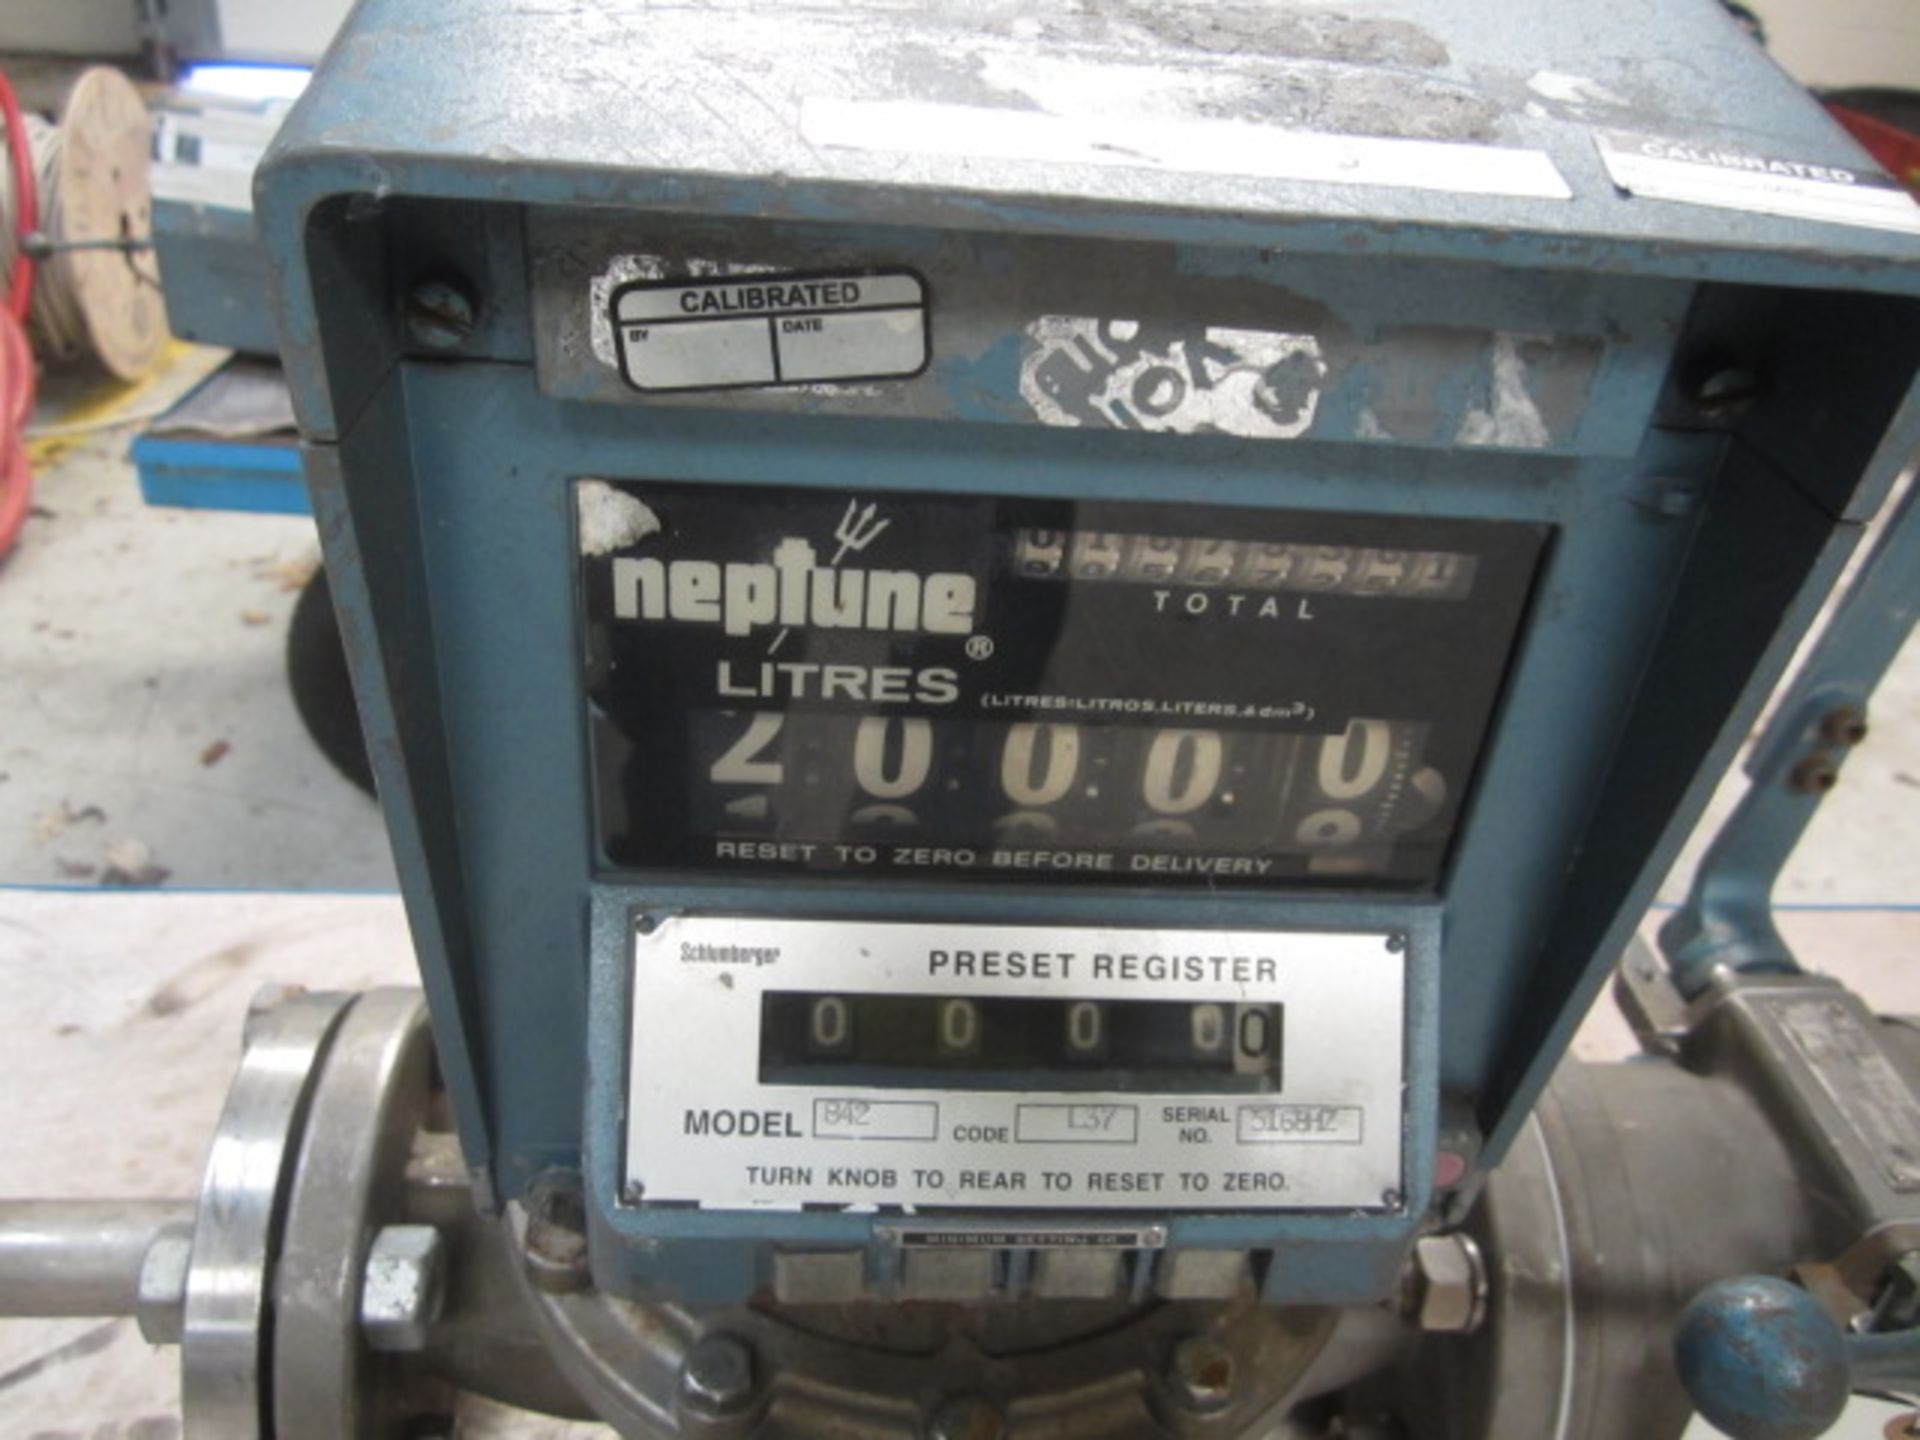 Neptune 842 batch meter mounted on mobile pedestrian driven Trailer, code L37, serial no. 5168HZ - Image 3 of 3